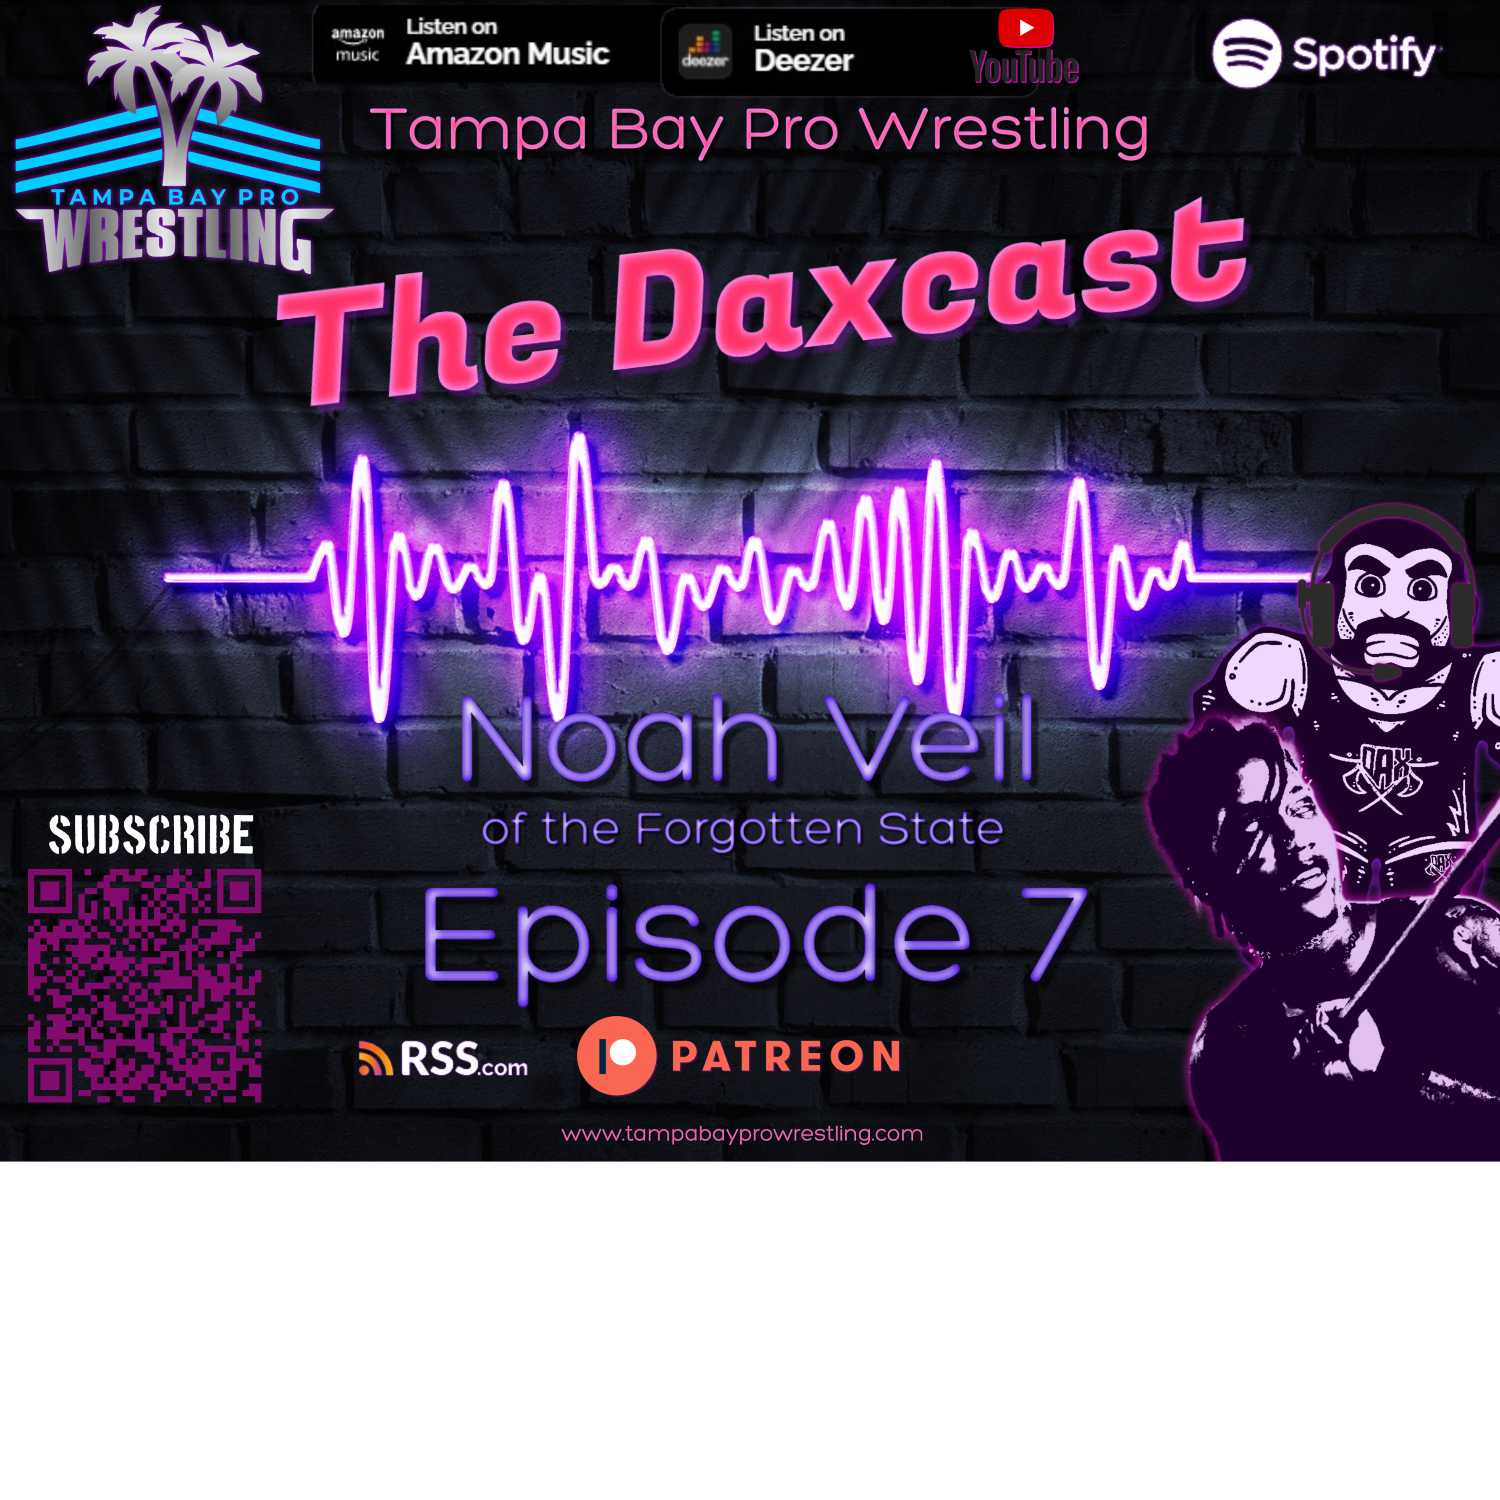 The Daxcast - ep 7 Noah Veil of the "Forgotten State"